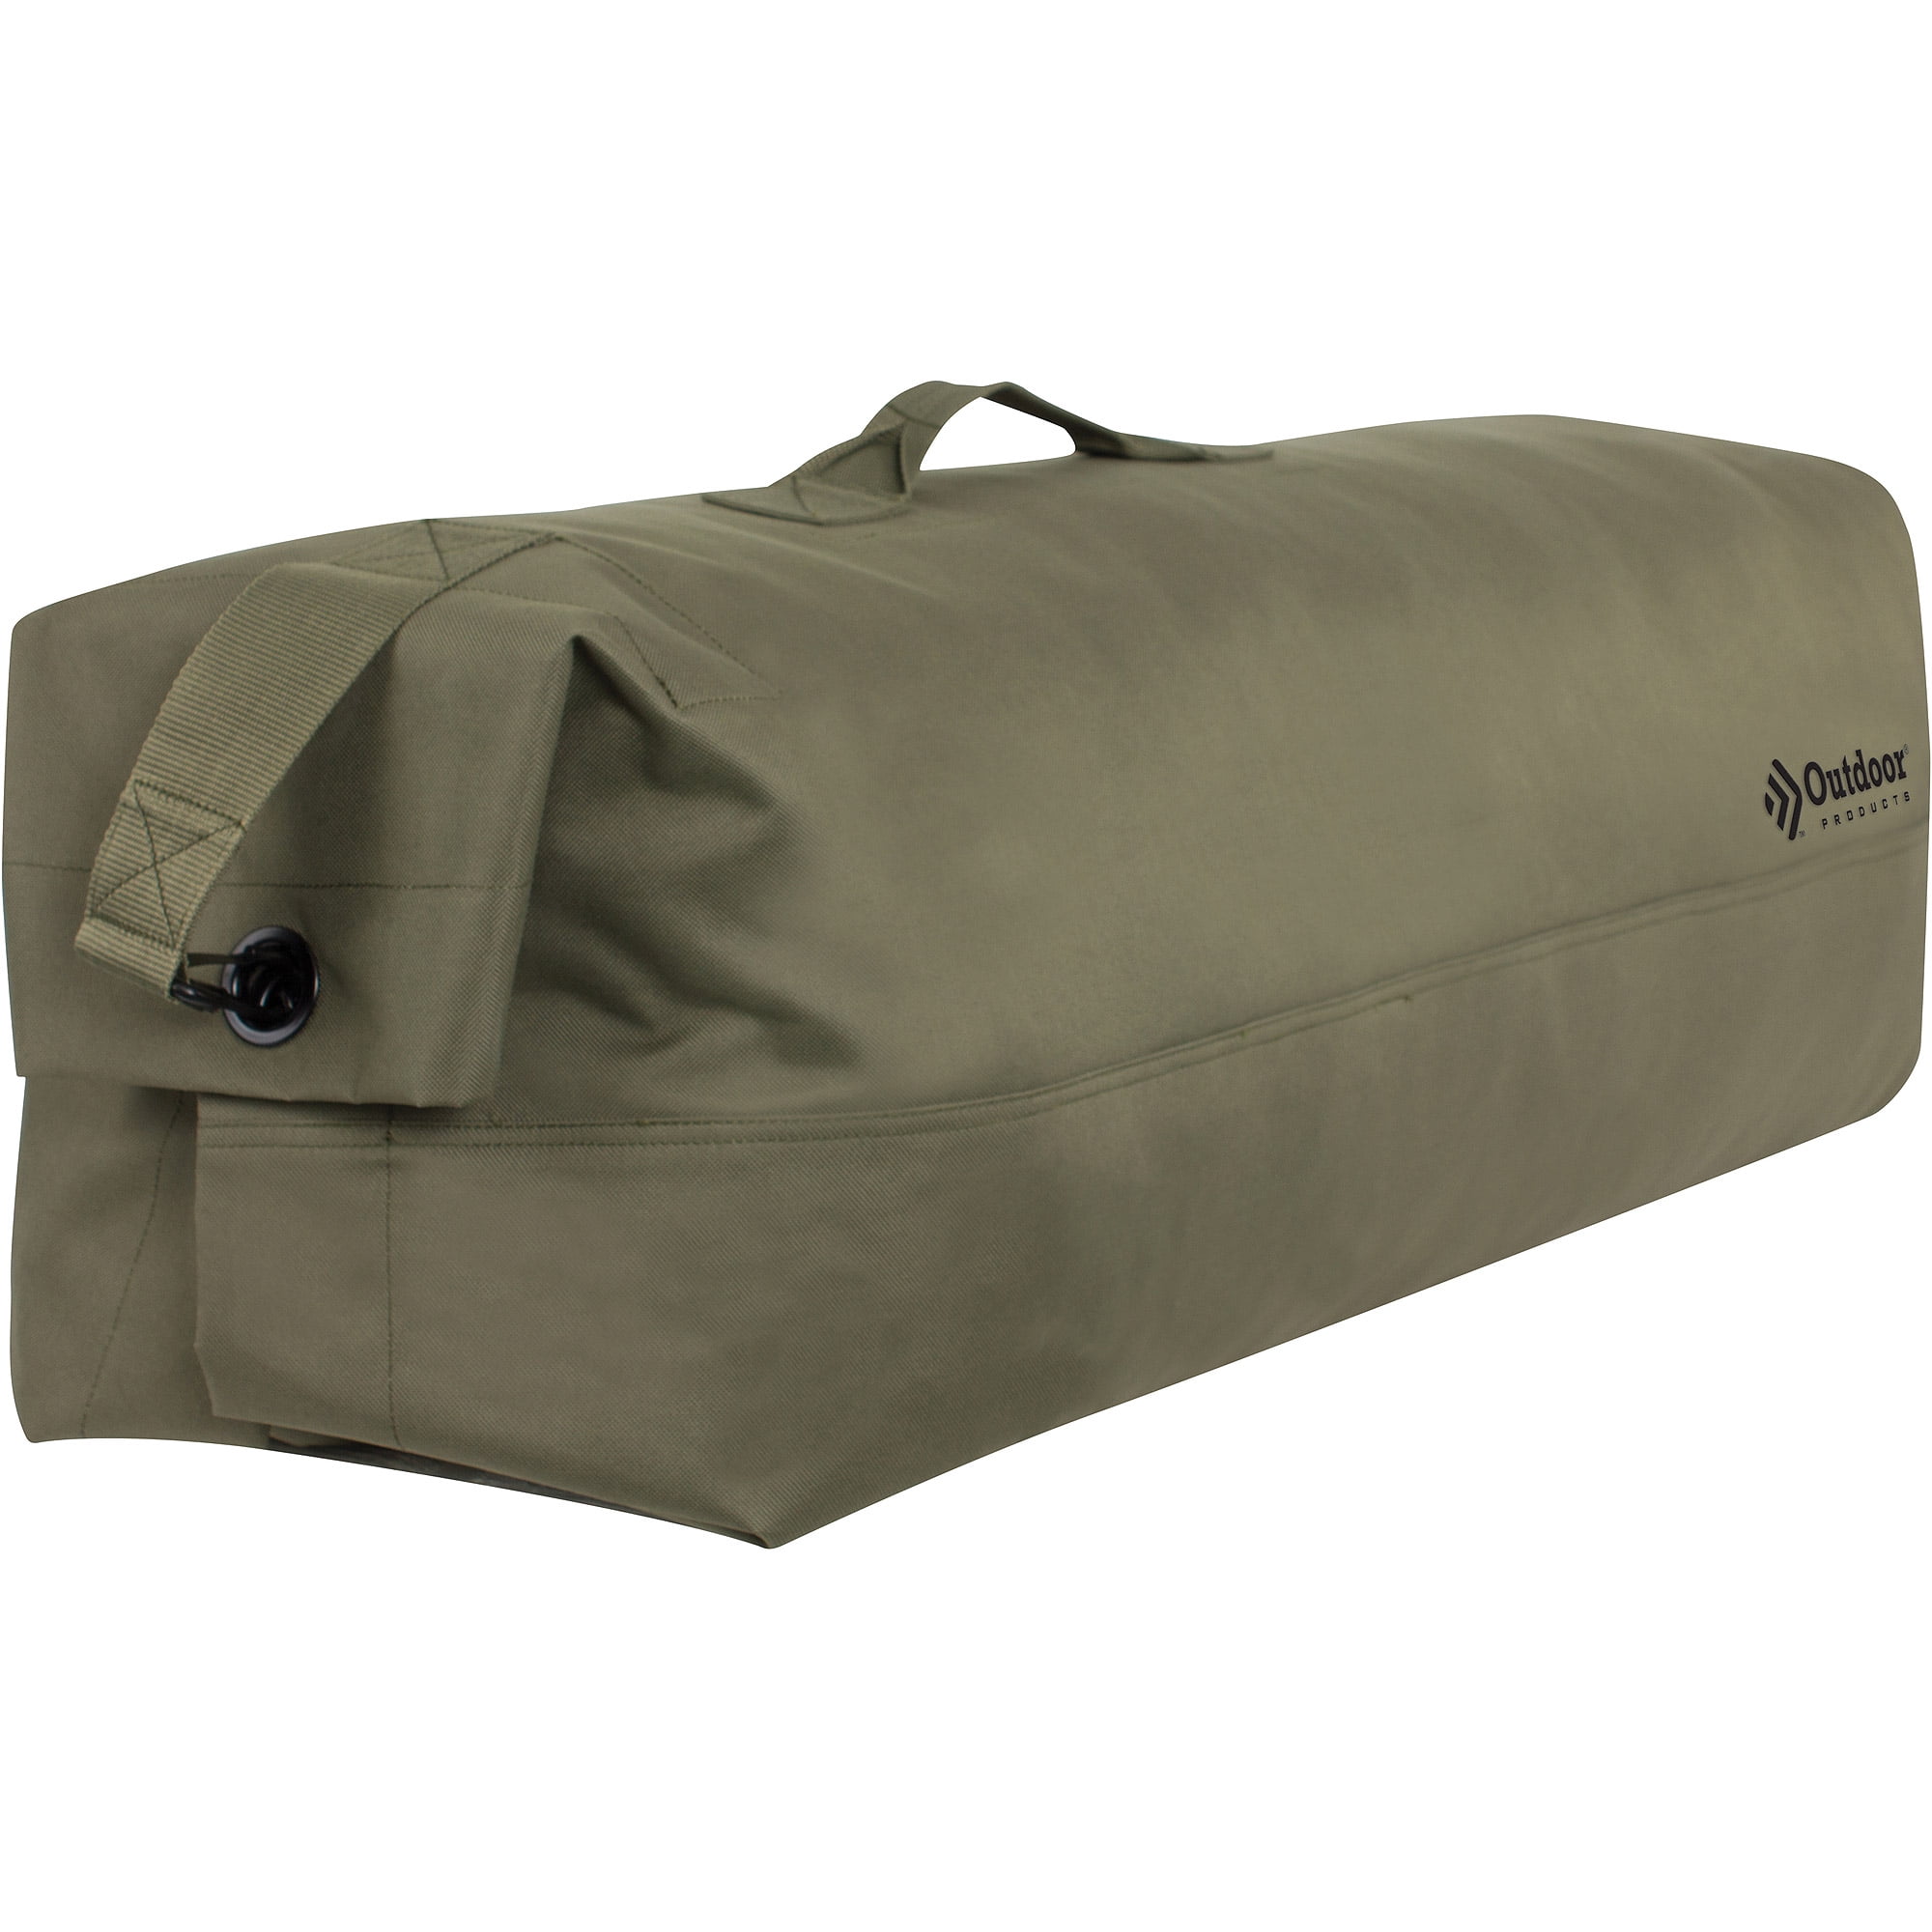 Outdoor Gear Canvas Holdall Bag Unisex 